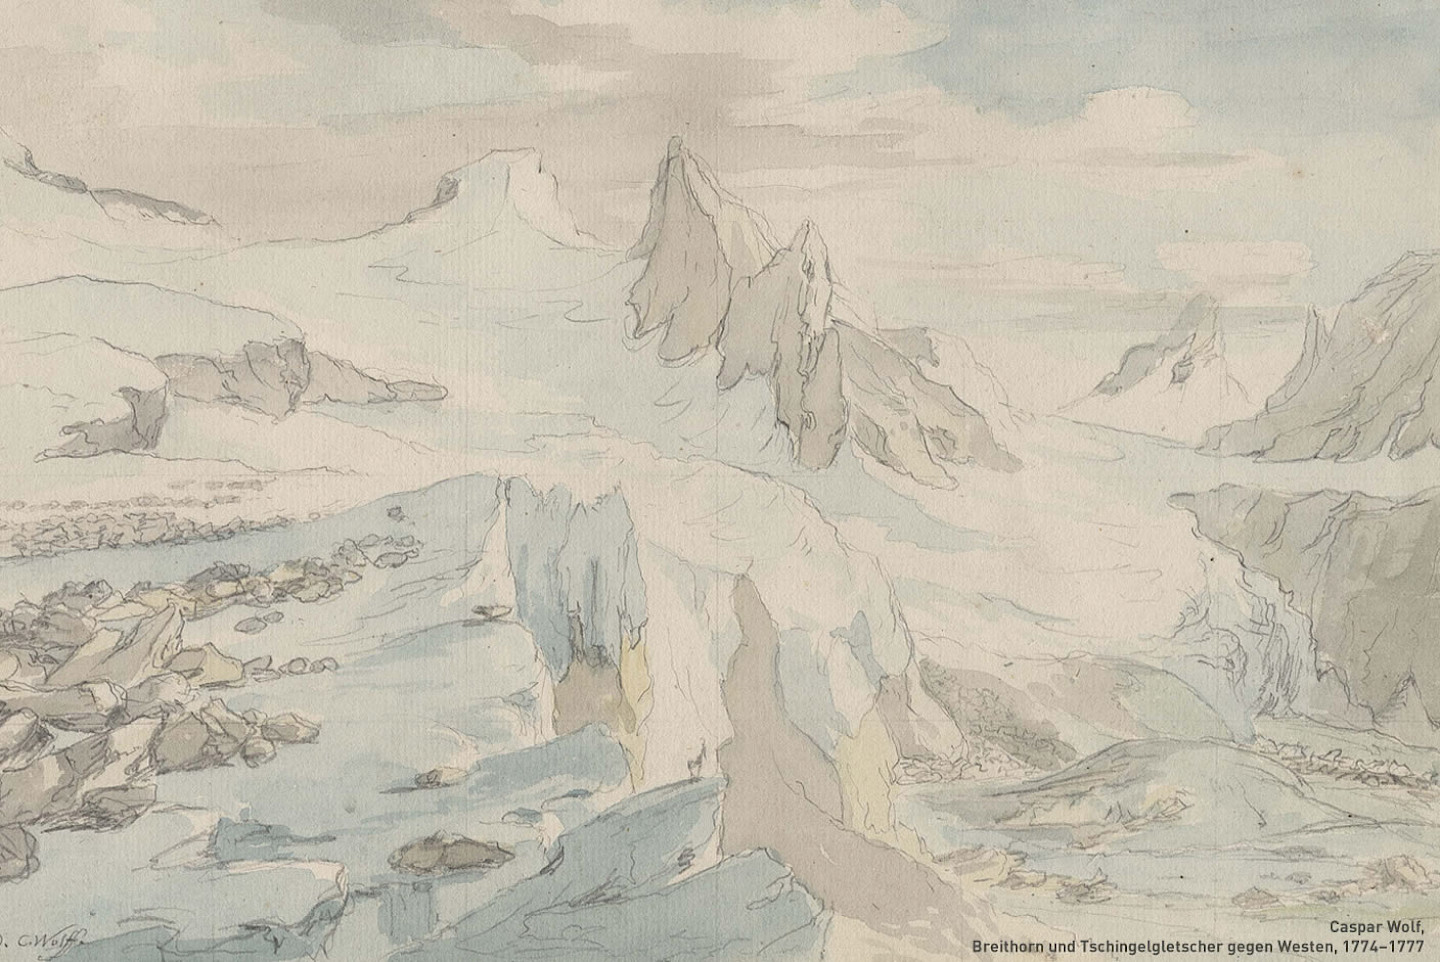 Irene Kopelman. On Glaciers and Avalanches.